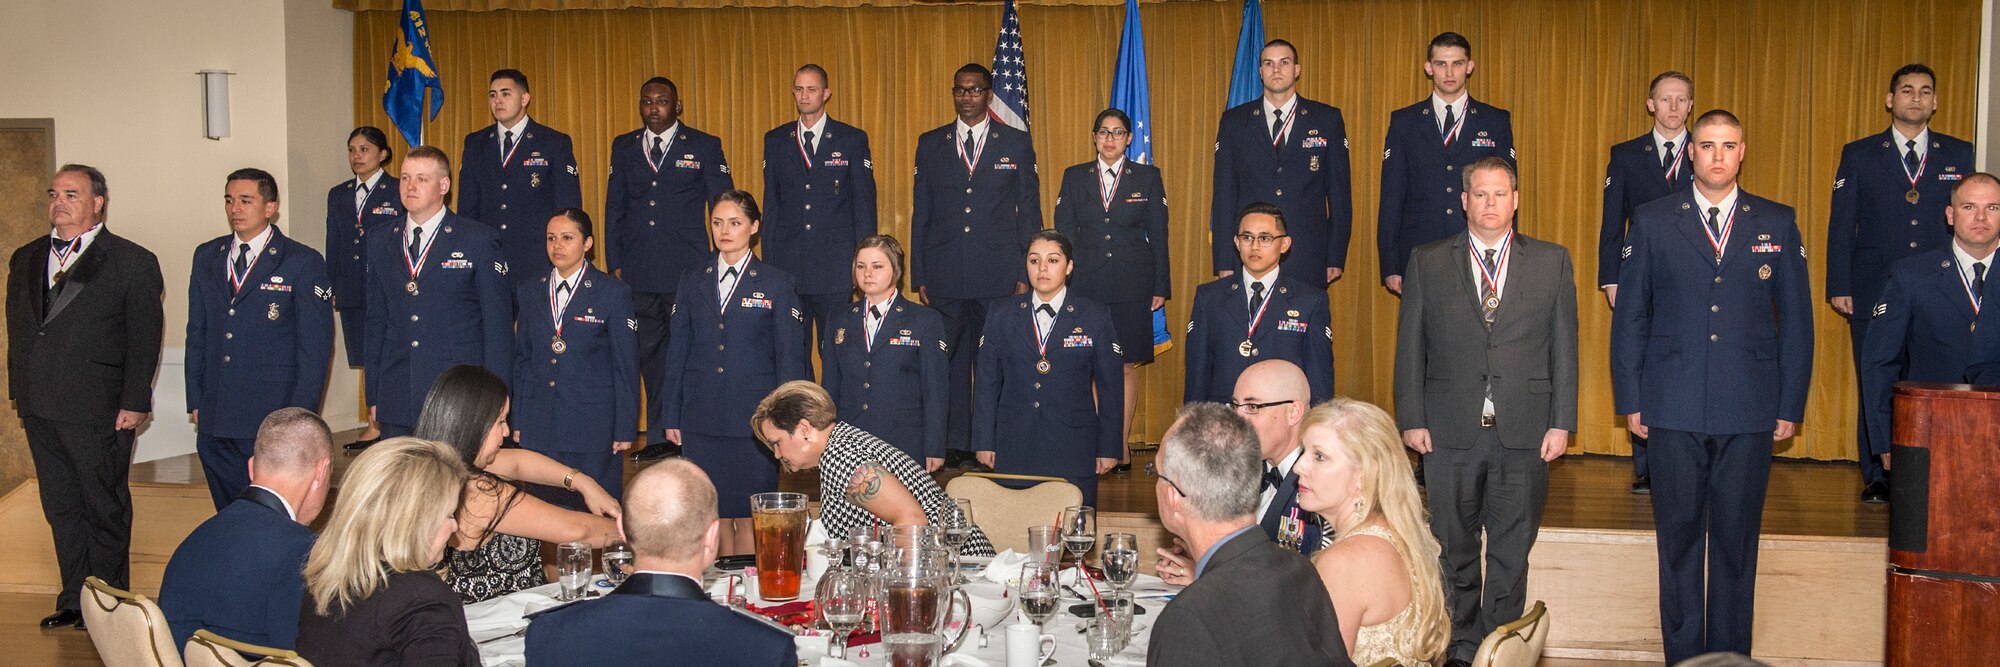 Airman Leadership School graduates stand up before the audience during their graduation ceremony at Club Muroc Feb. 11. Among the class were the first two civilian graduates here at Edwards AFB. (U.S. Air Force photo by Kevin North)